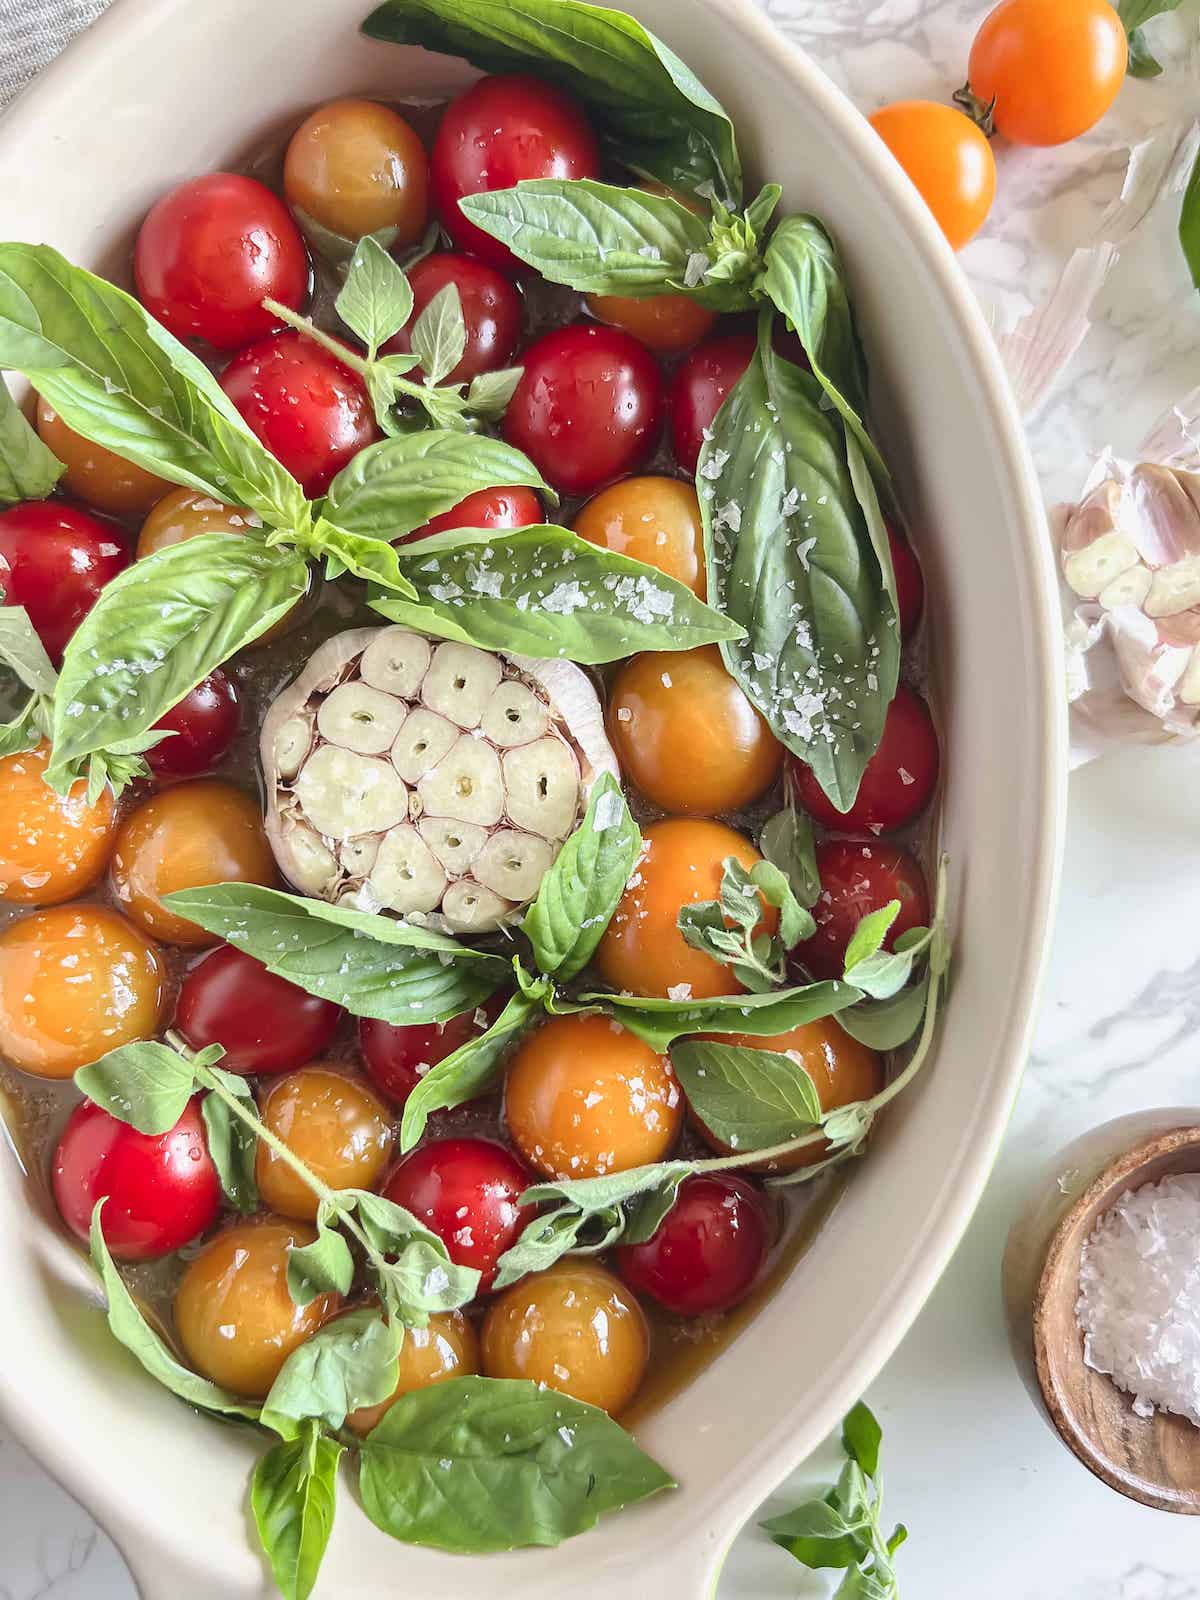 Oval baking dish with raw cherry tomatoes, olive oil, a whole head of garlic with the top cut off and fresh herbs.